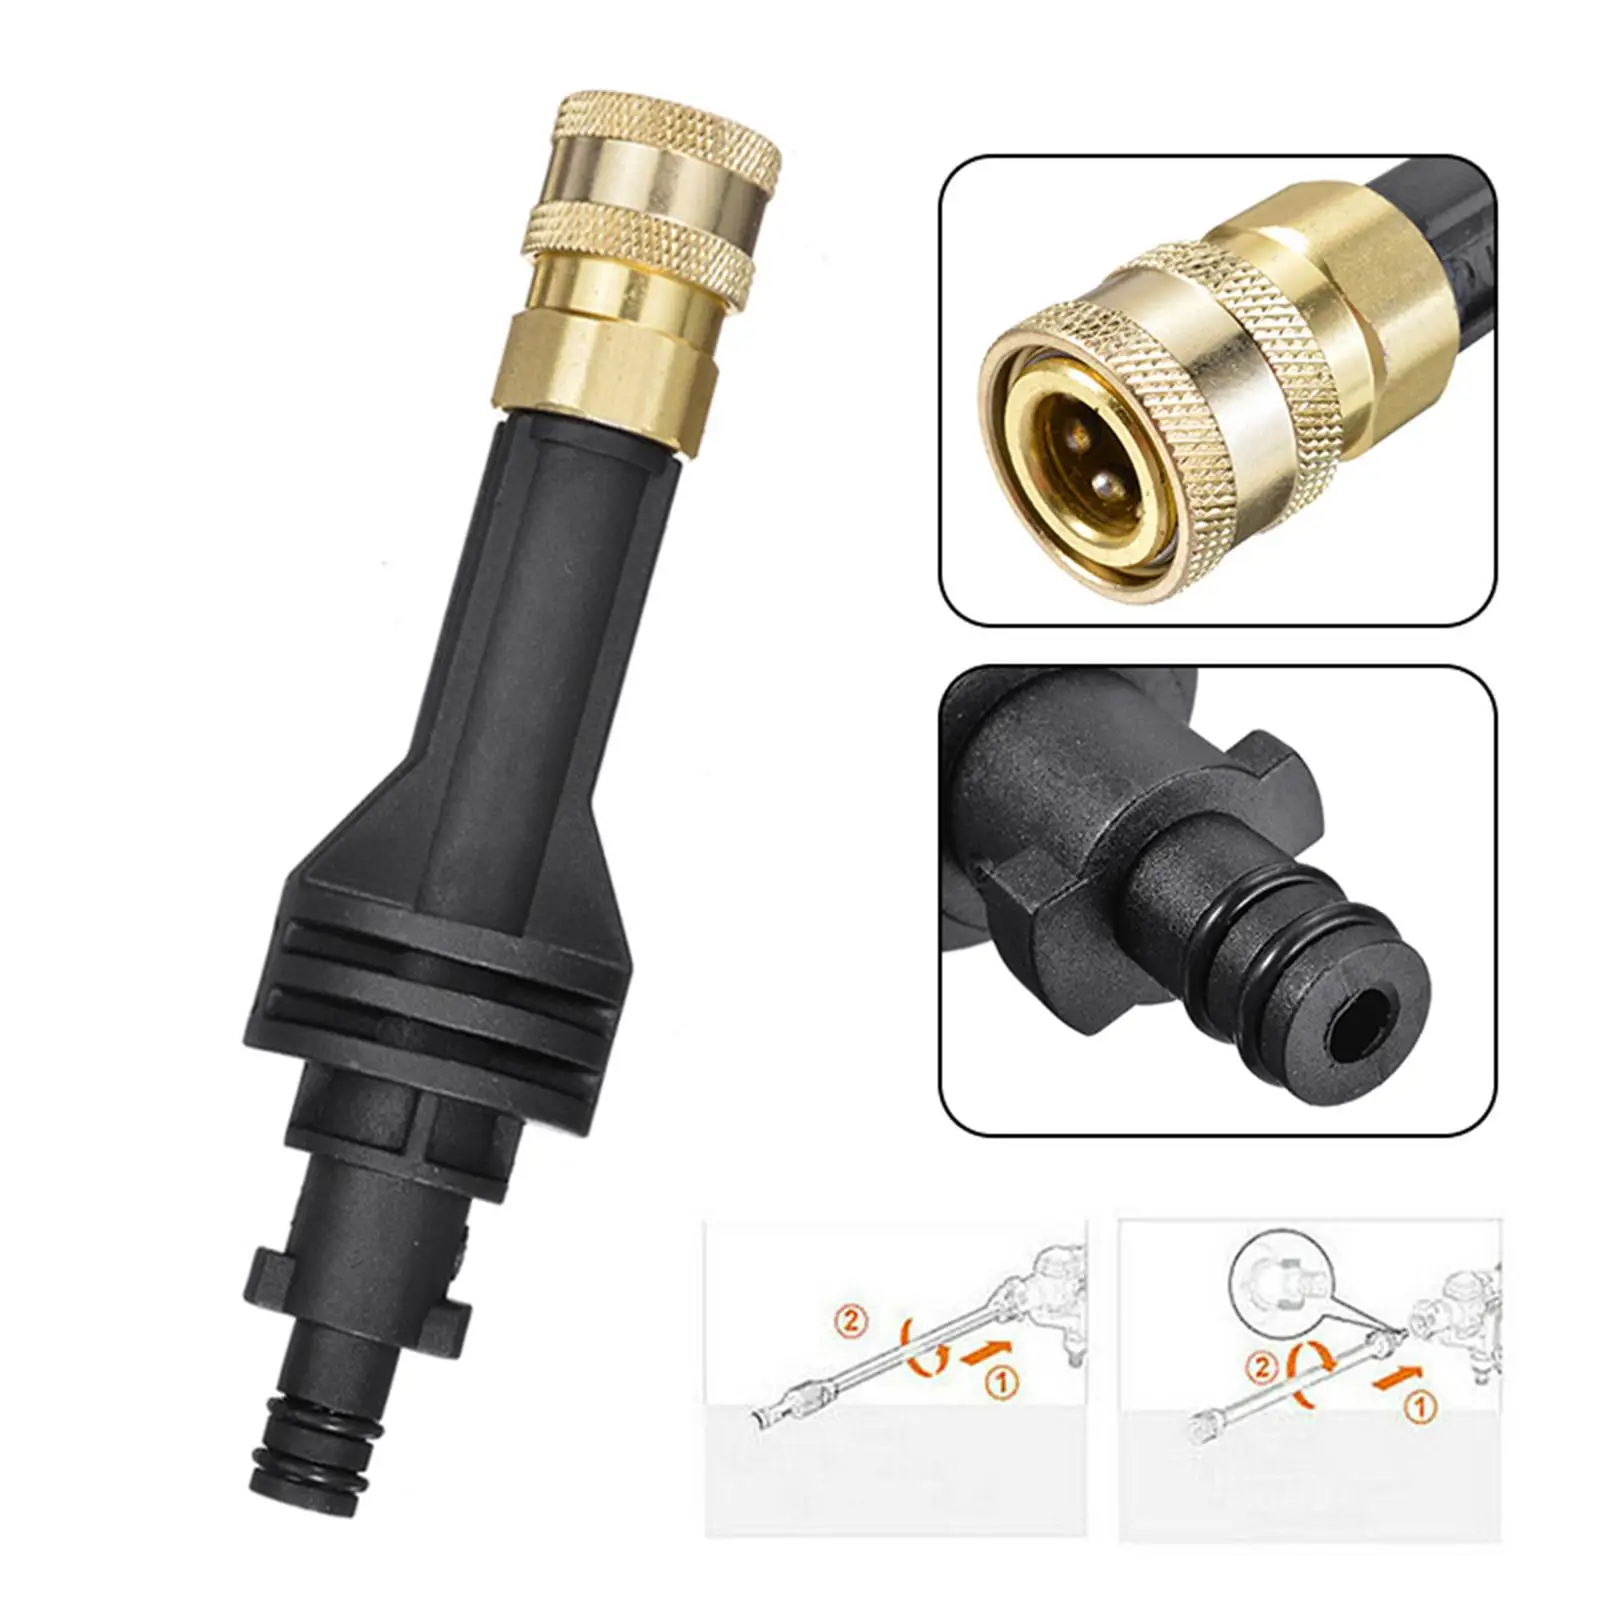 Alloy  Pressure Washer Extension  Adapter Power Spray Lance Extender Pressure Washer Extension Rod for Wu629E 630 644